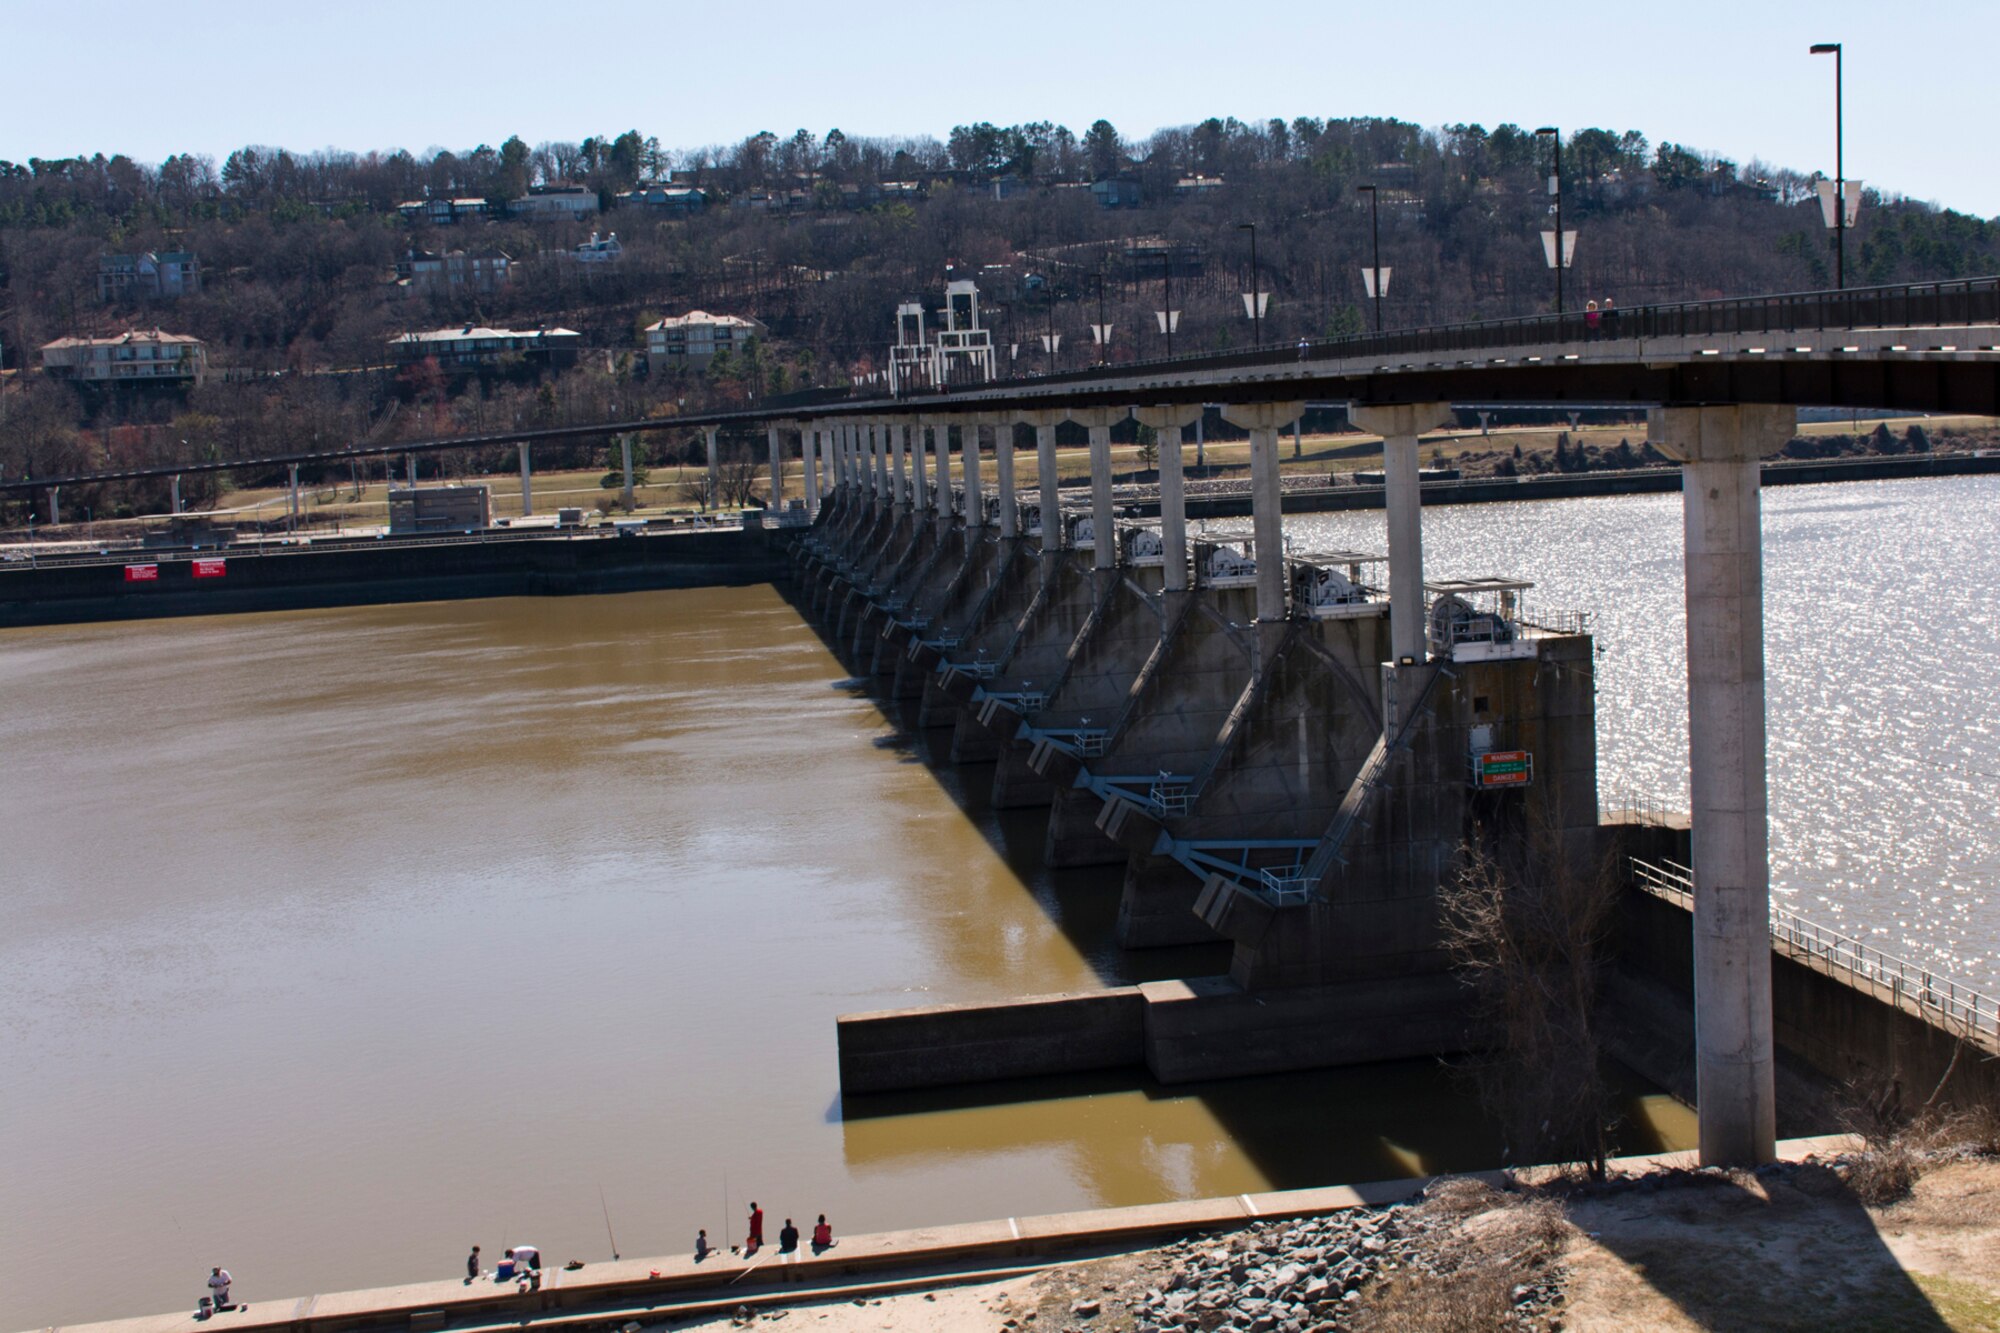 The Big Dam Bridge, which is mounted on top of the Murray Lock and Dam on the Arkansas River, hosts a bevy of runners, walkers and cyclists in Little Rock, Ark., Feb. 27, 2016. The bridge, which connects the cities of North Little Rock and Little Rock, Ark., received its uncommon name from Pulaski County Judge F.G. “Buddy” Villines, who was quoted to say, "We're going to build that dam bridge." (Courtesy photo by Jeff Walston)